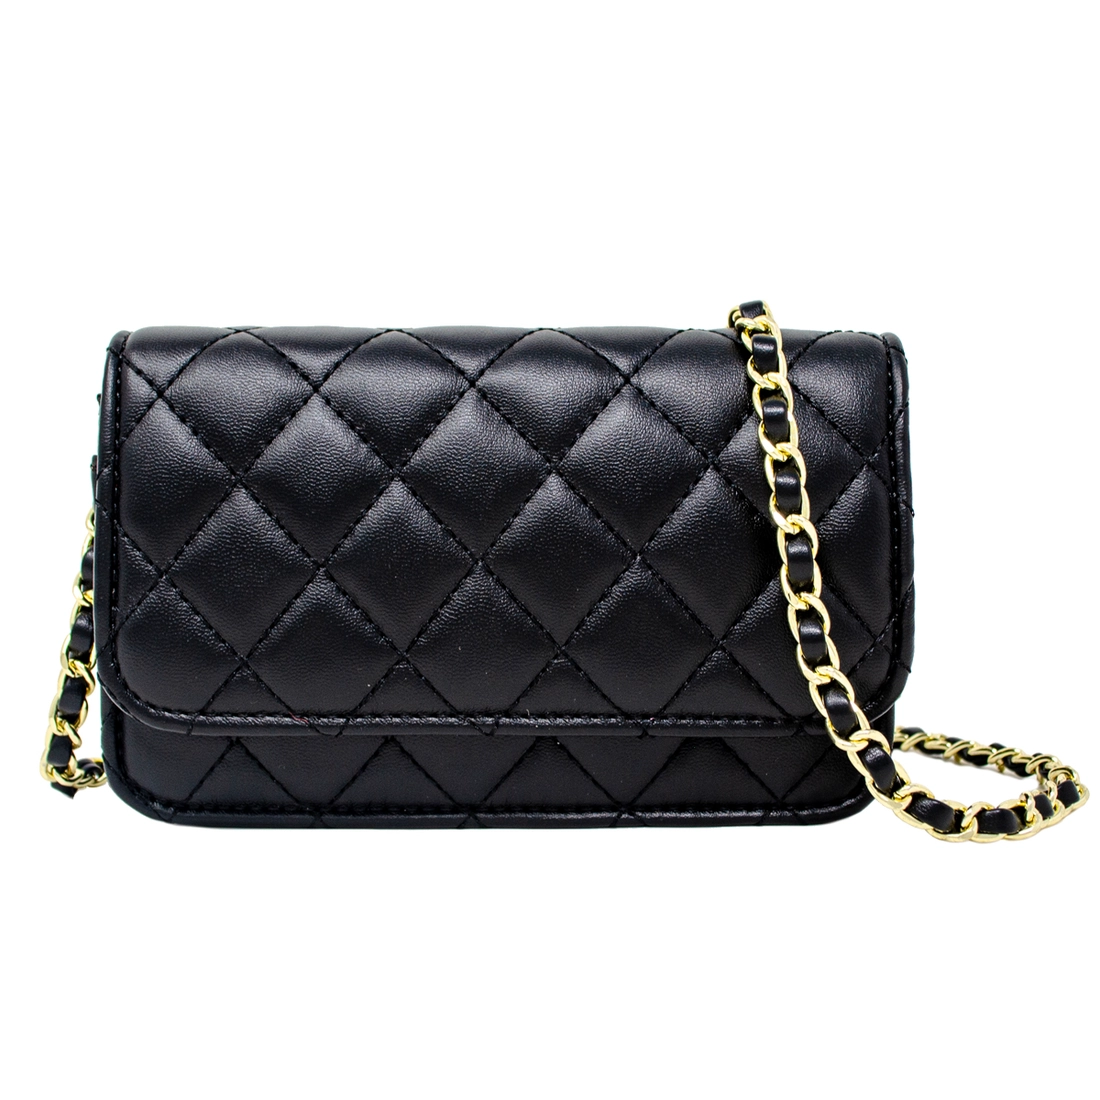 Classic Quilted Flap Bag - Black Zomi Gems Kids Purse